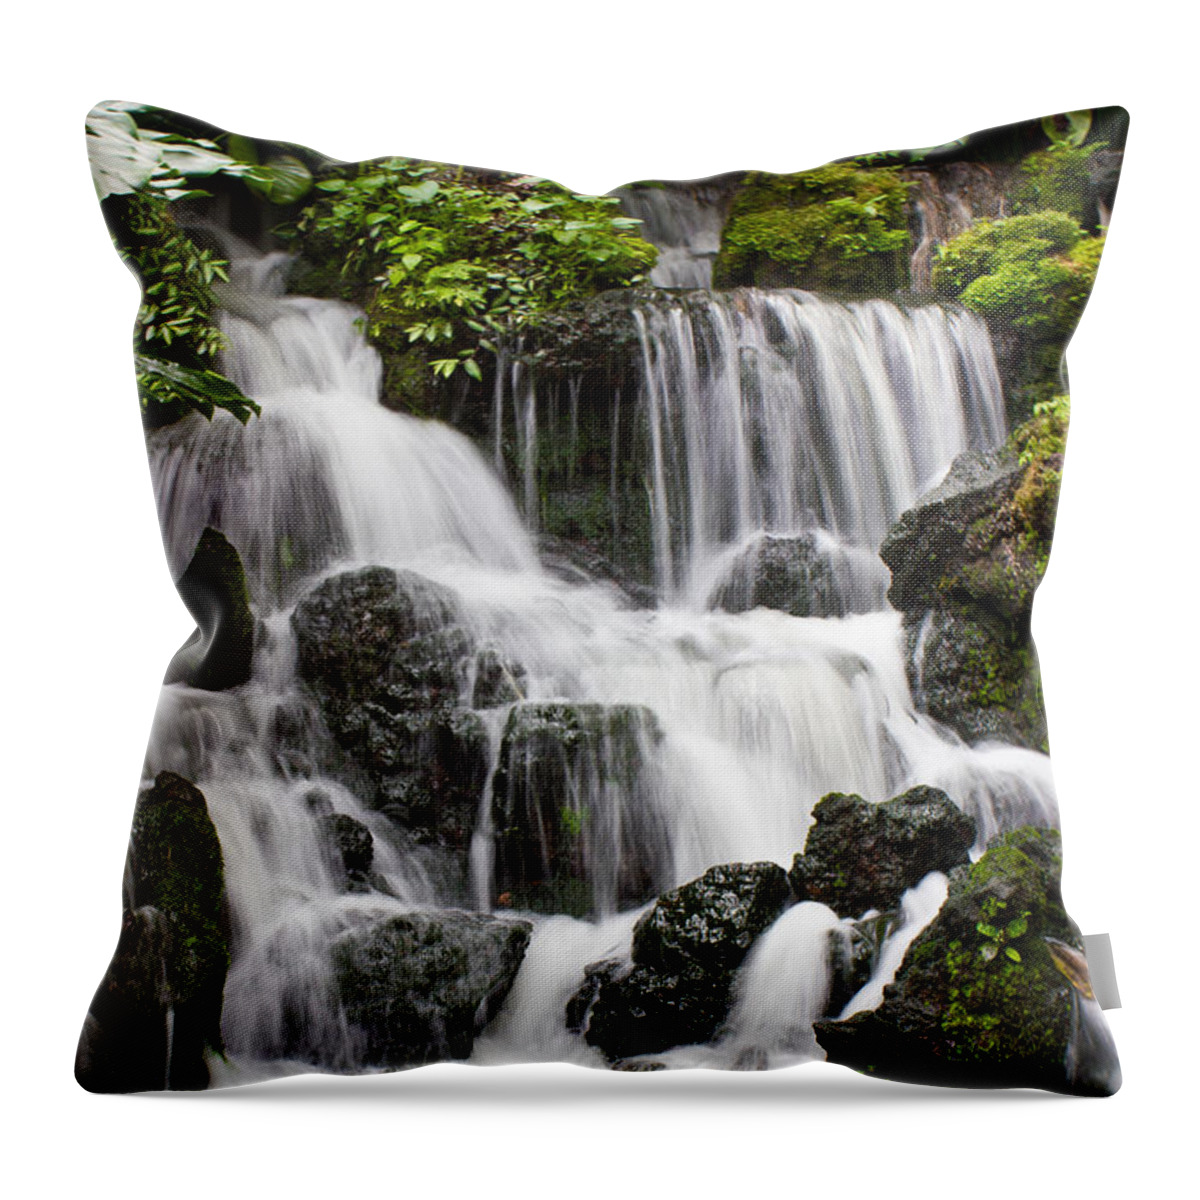 Travel Throw Pillow featuring the photograph Going With The Flow by Christie Kowalski